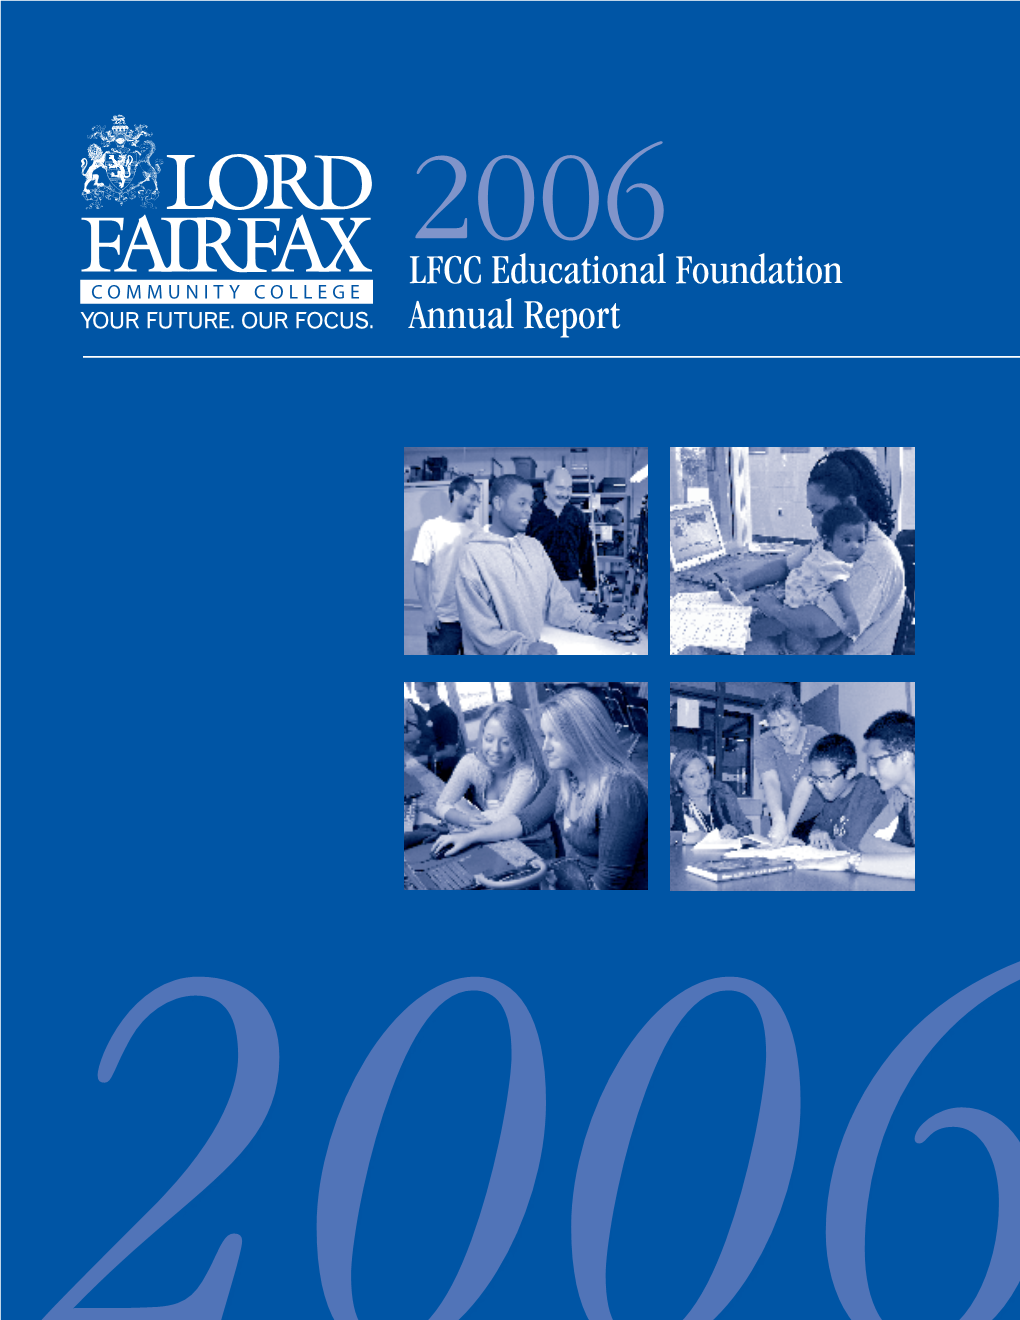 LFCC Educational Foundation Annual Report